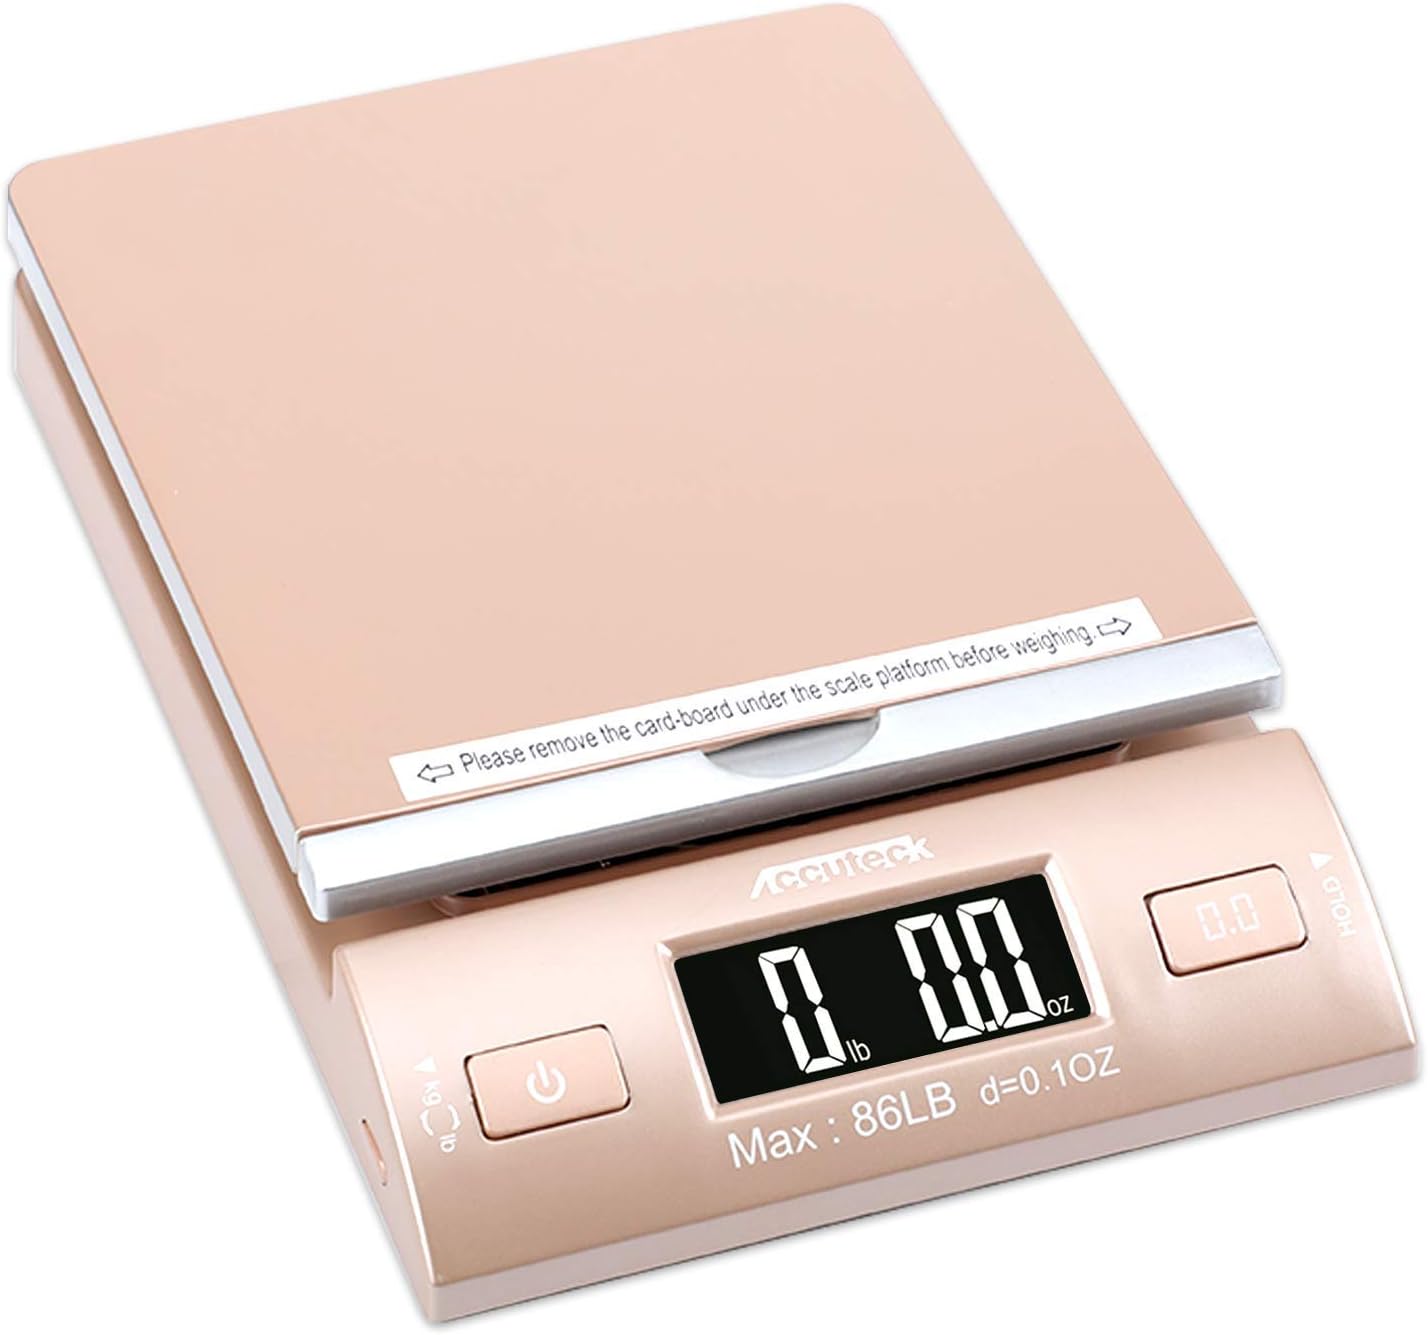 Accuteck Gold 86Lbs Digital Shipping Postal Scale with [...]